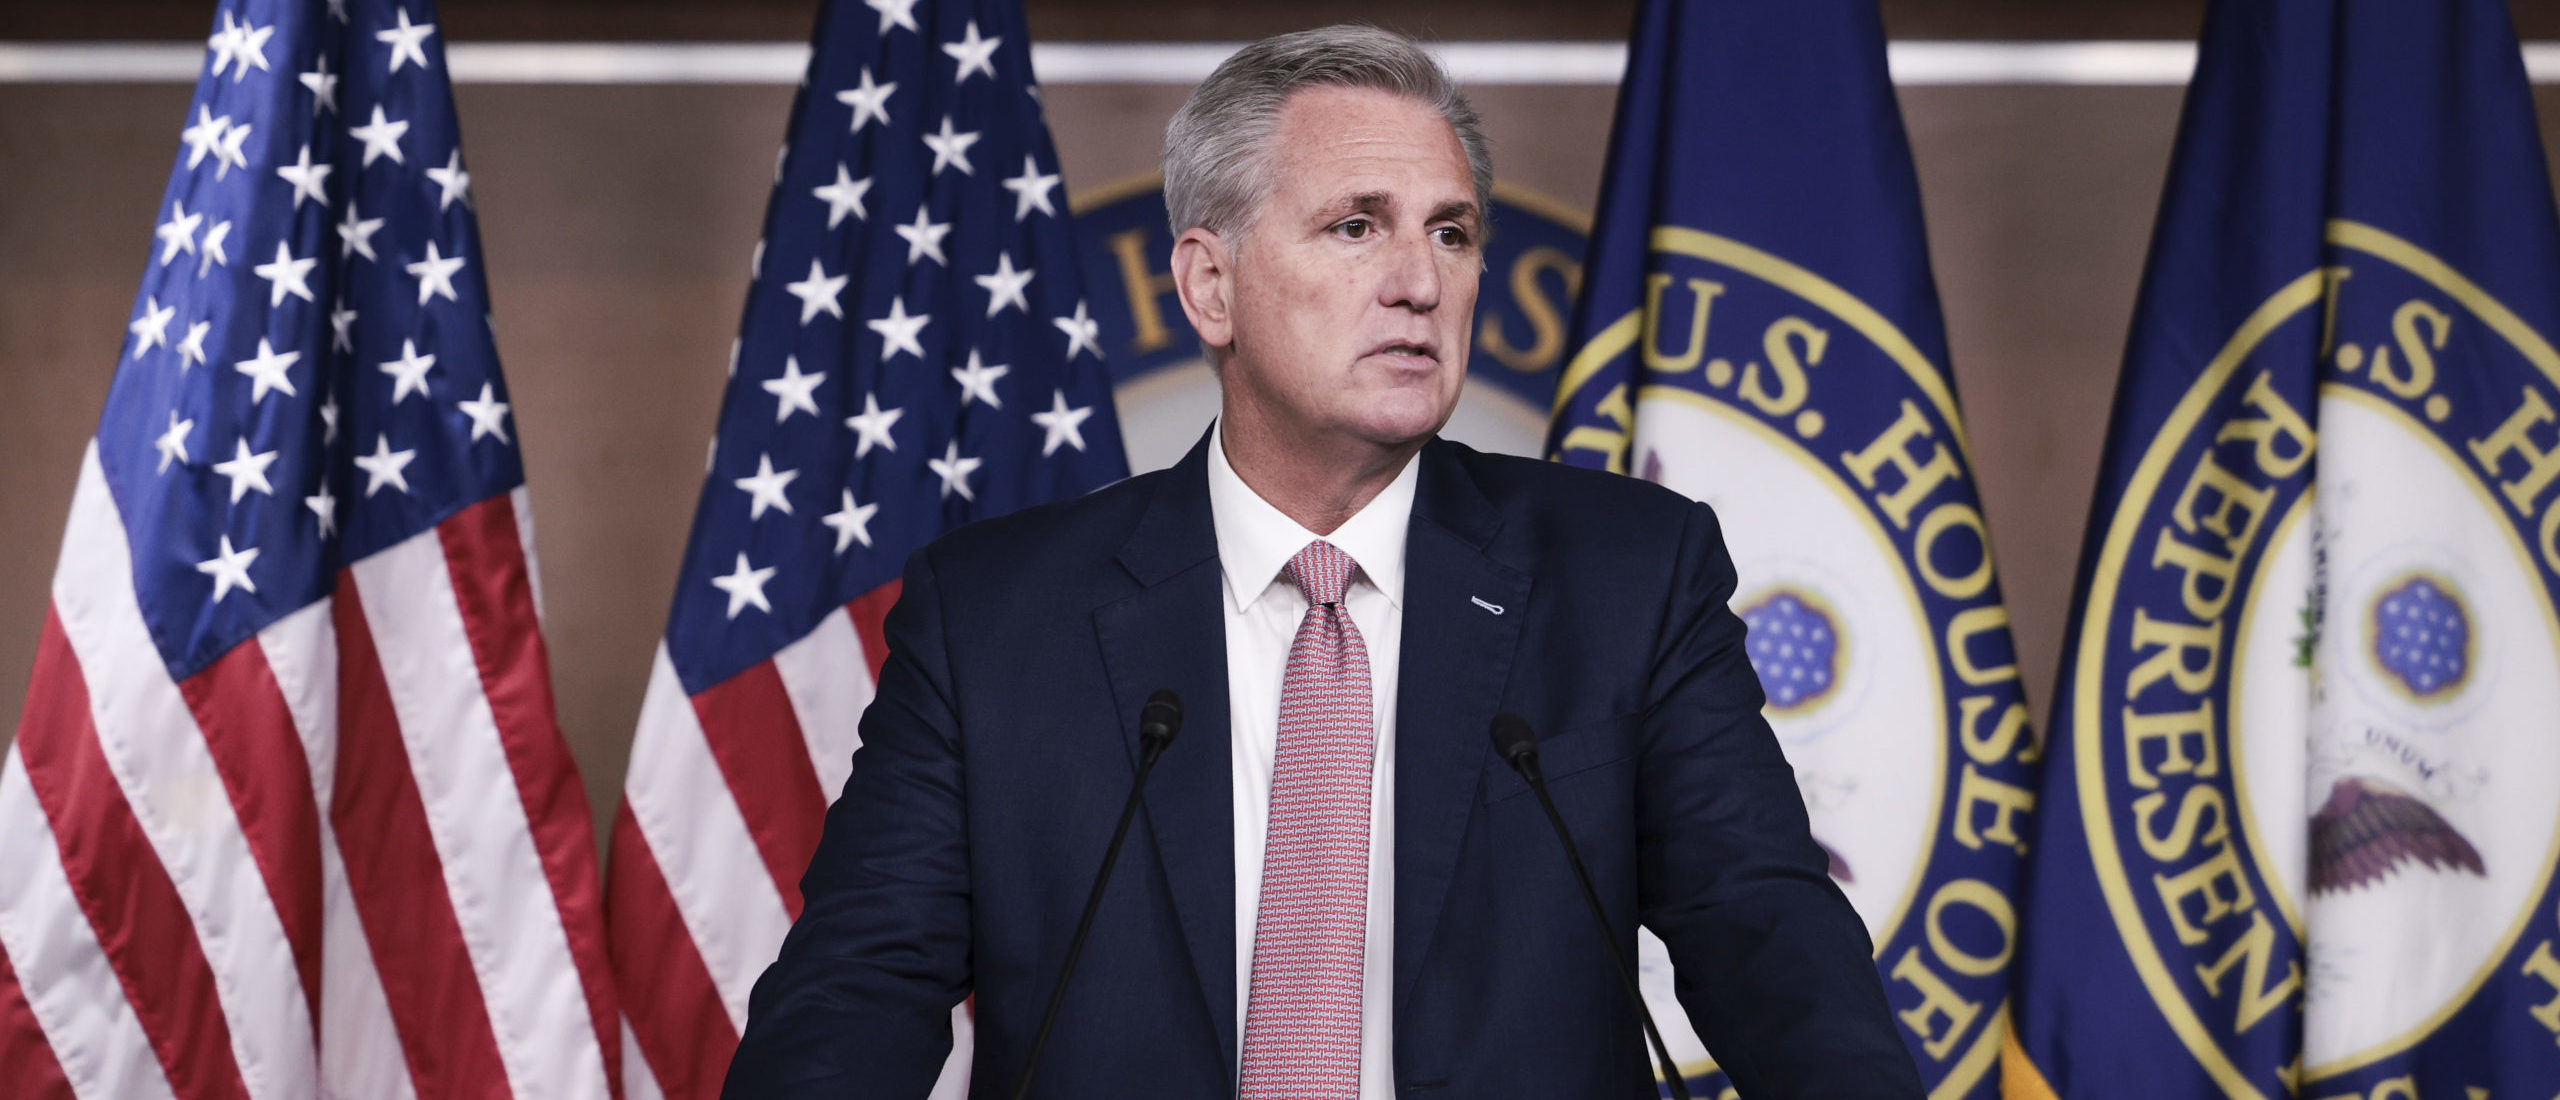 House Minority Leader Kevin McCarthy speaks at his weekly press conference on Oct. 21. (Anna Moneymaker/Getty Images)